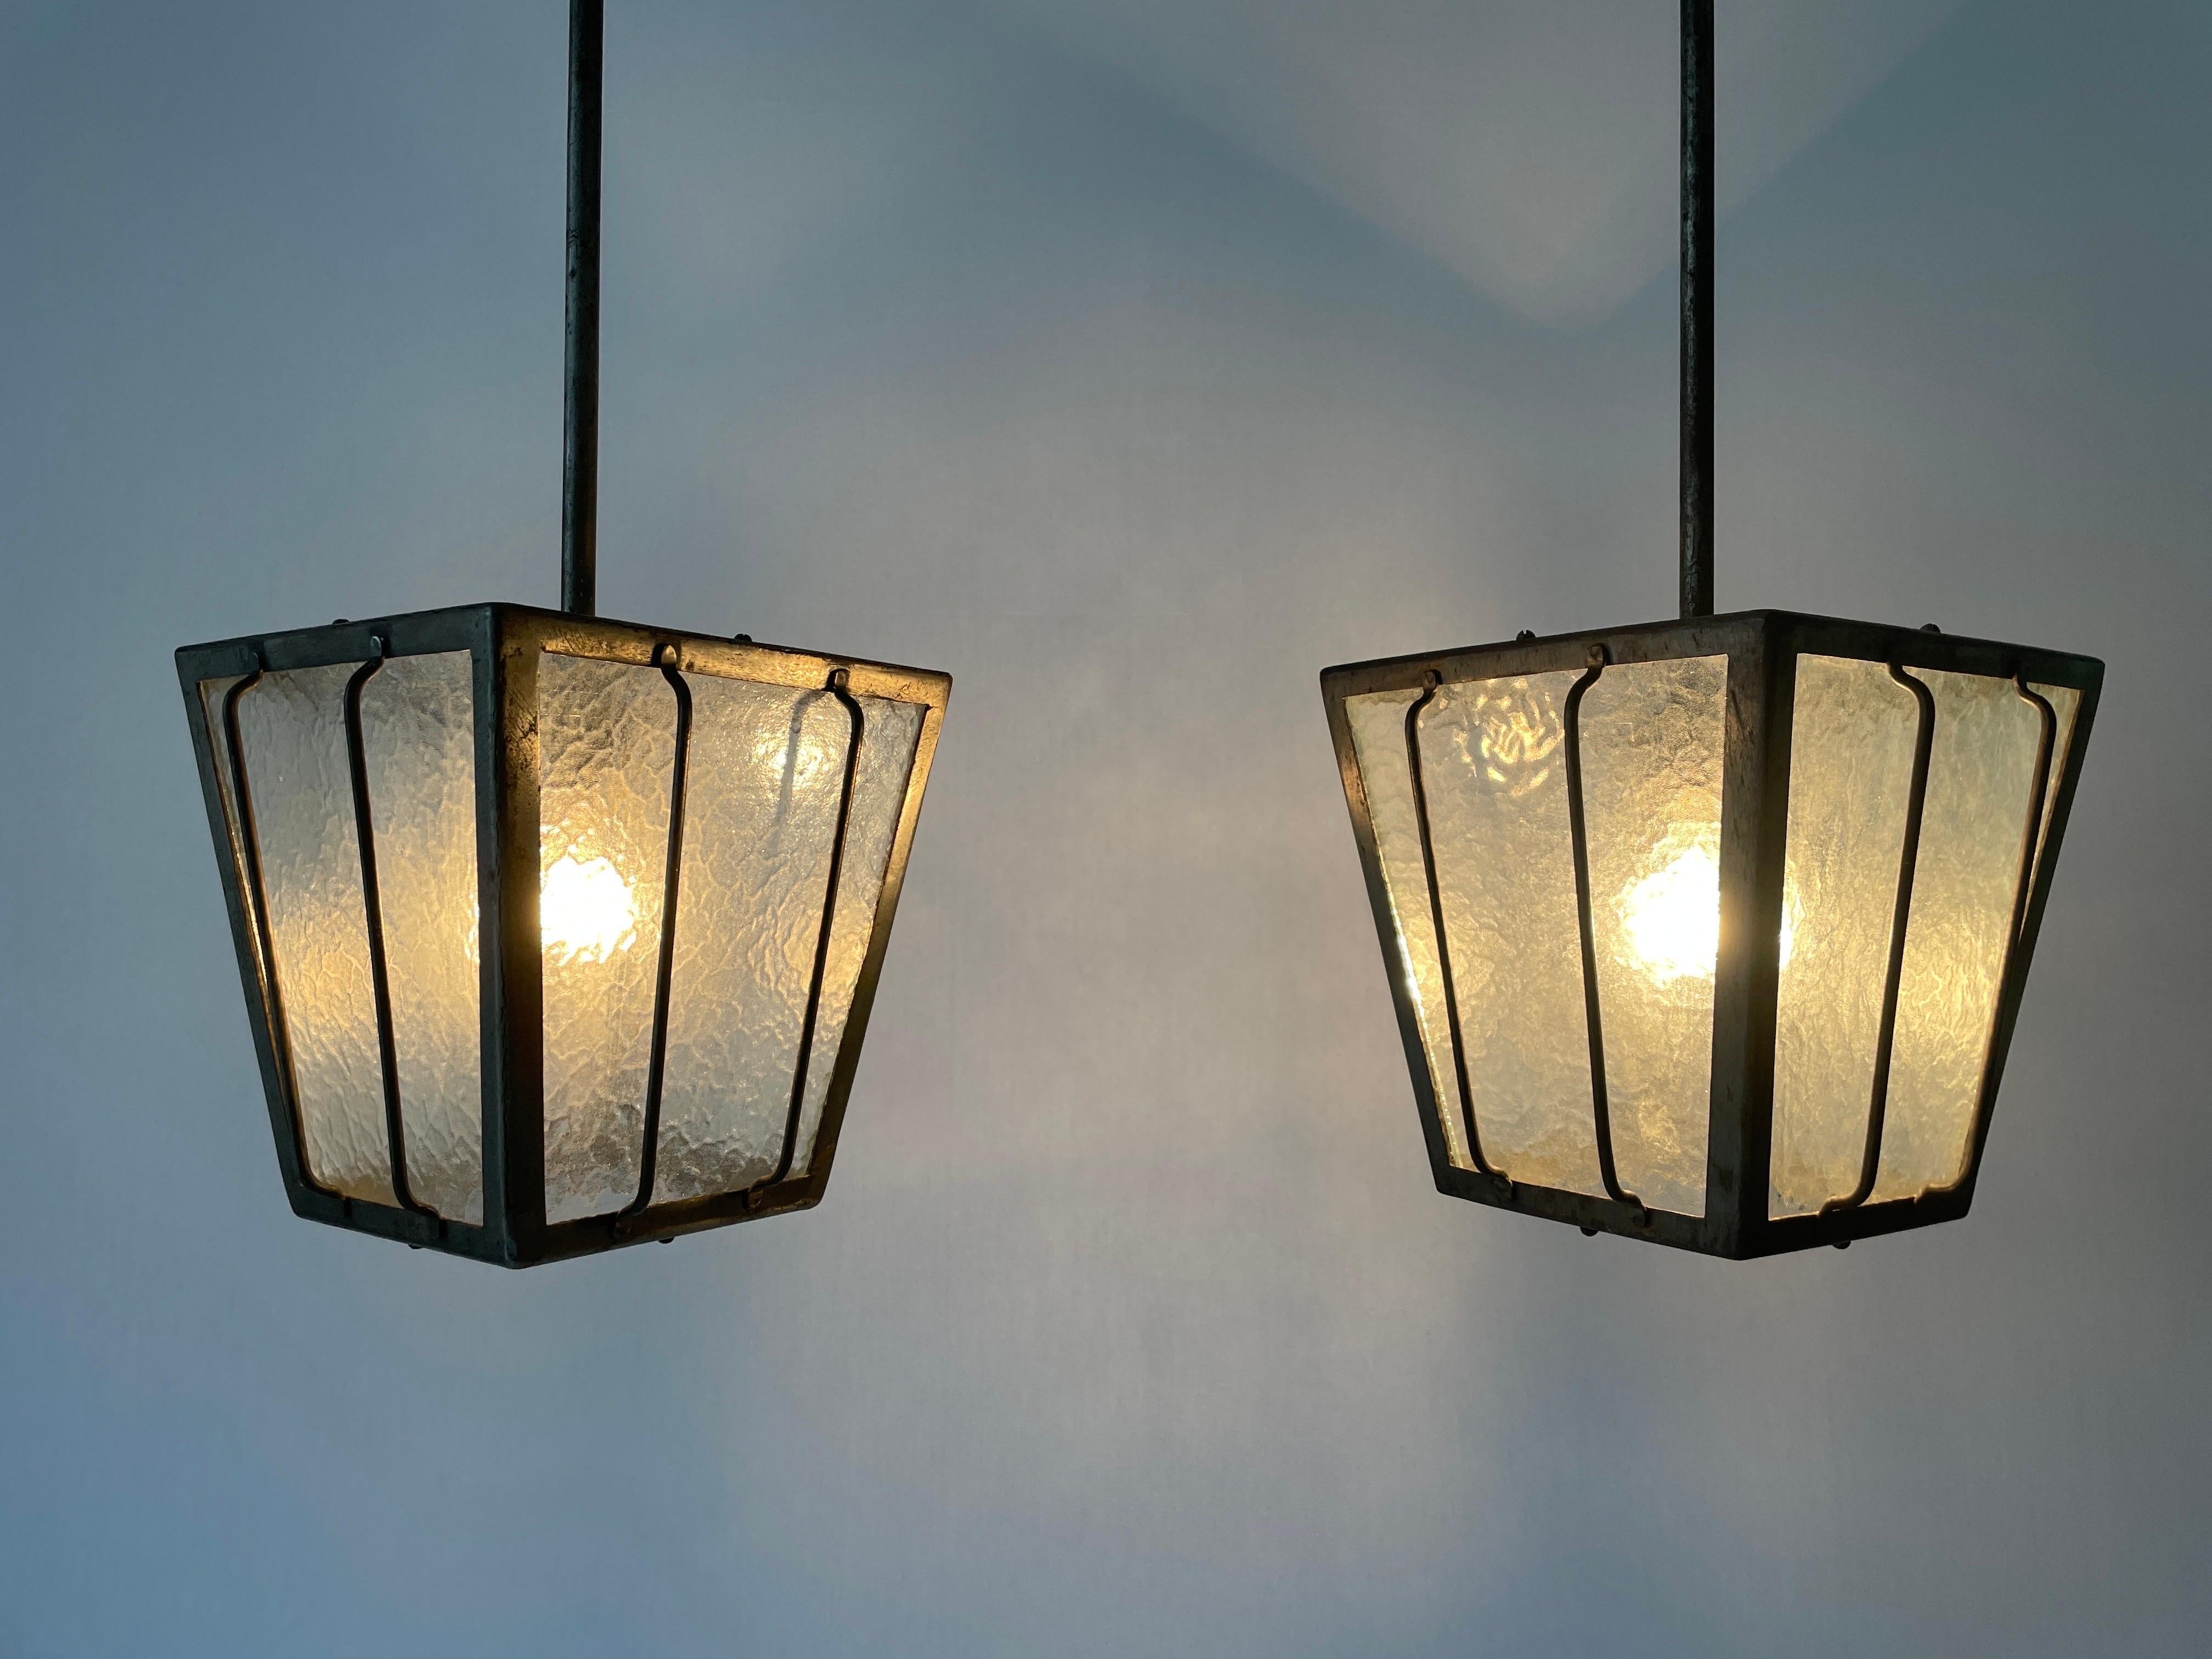 Frosted Glass Milano Apartment Pair of Ceiling Lamps, 1950s, Italy For Sale 7